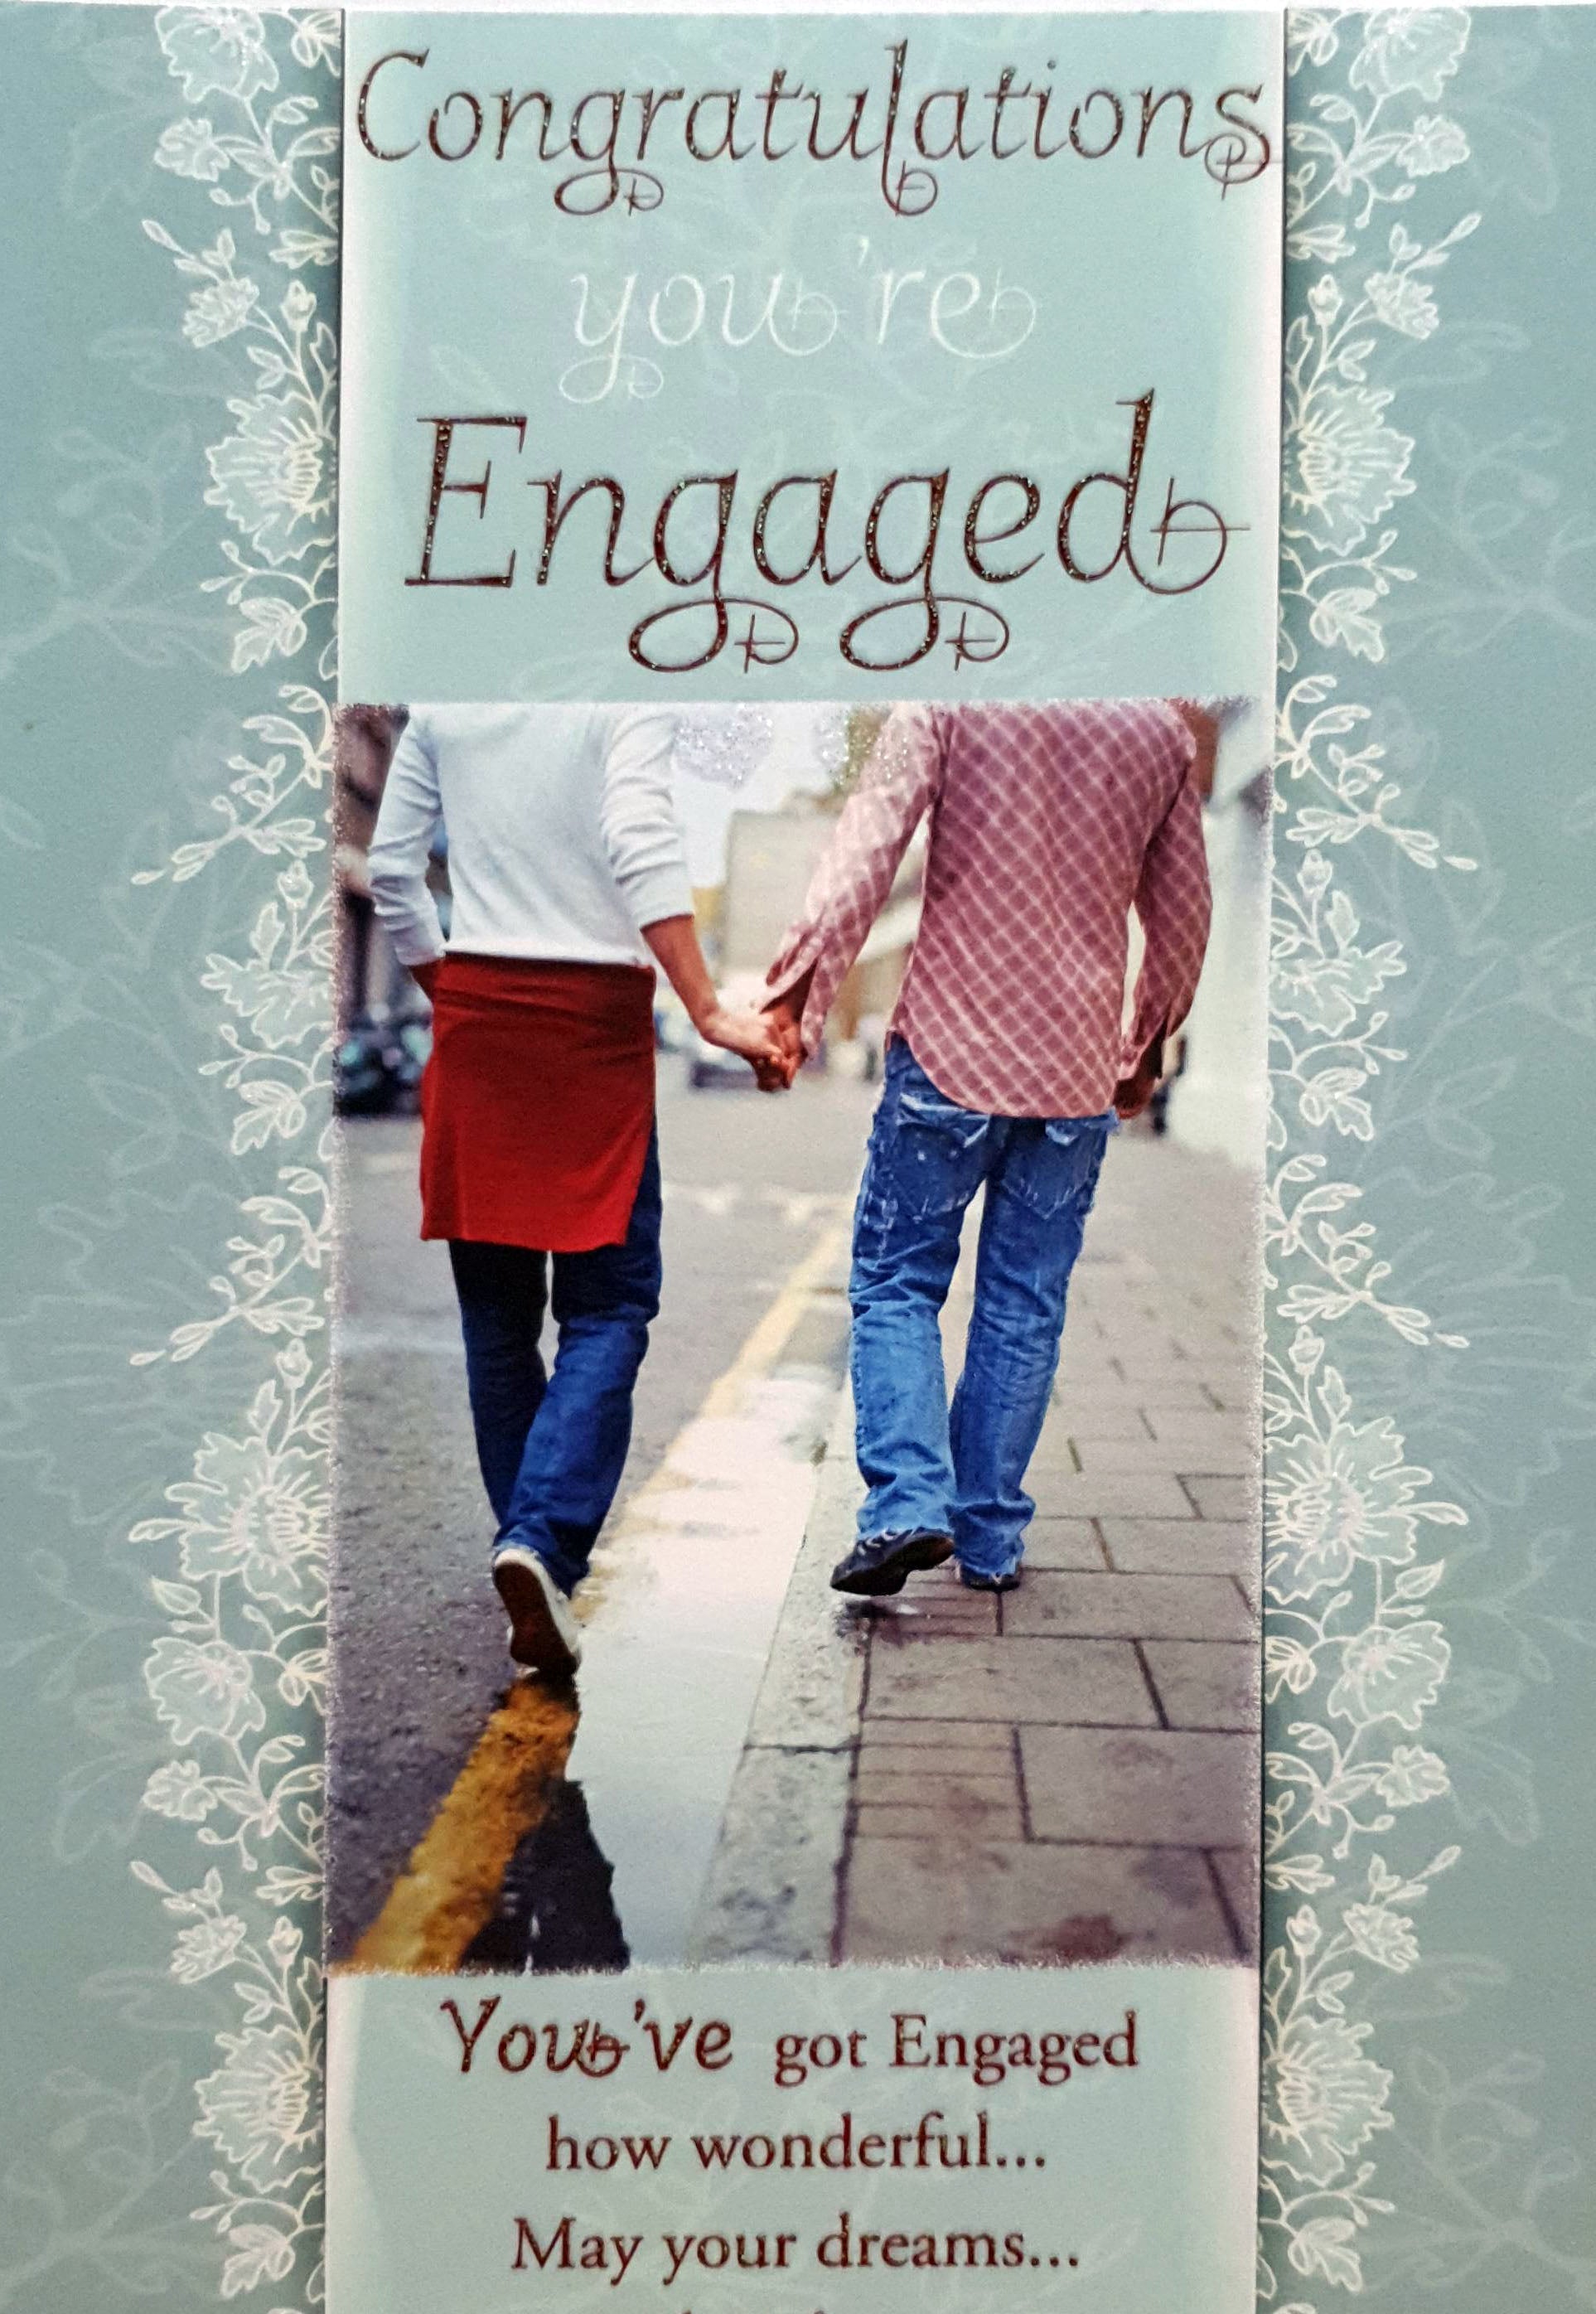 Male Couple Engagement Card - Congratulations on Your Wonderful News!